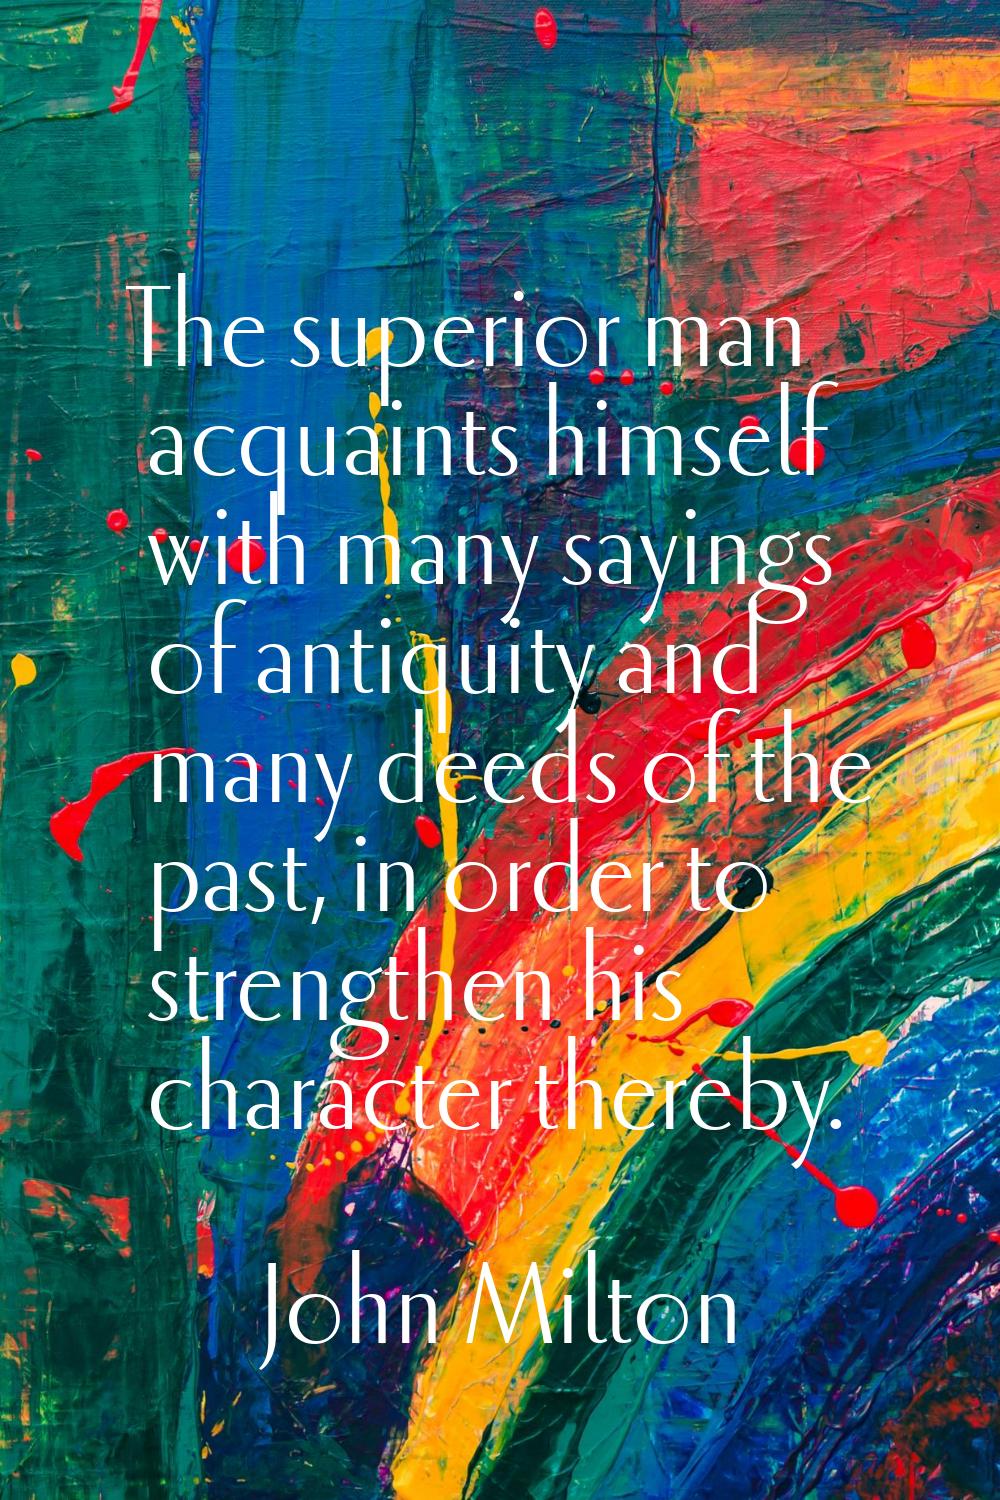 The superior man acquaints himself with many sayings of antiquity and many deeds of the past, in or